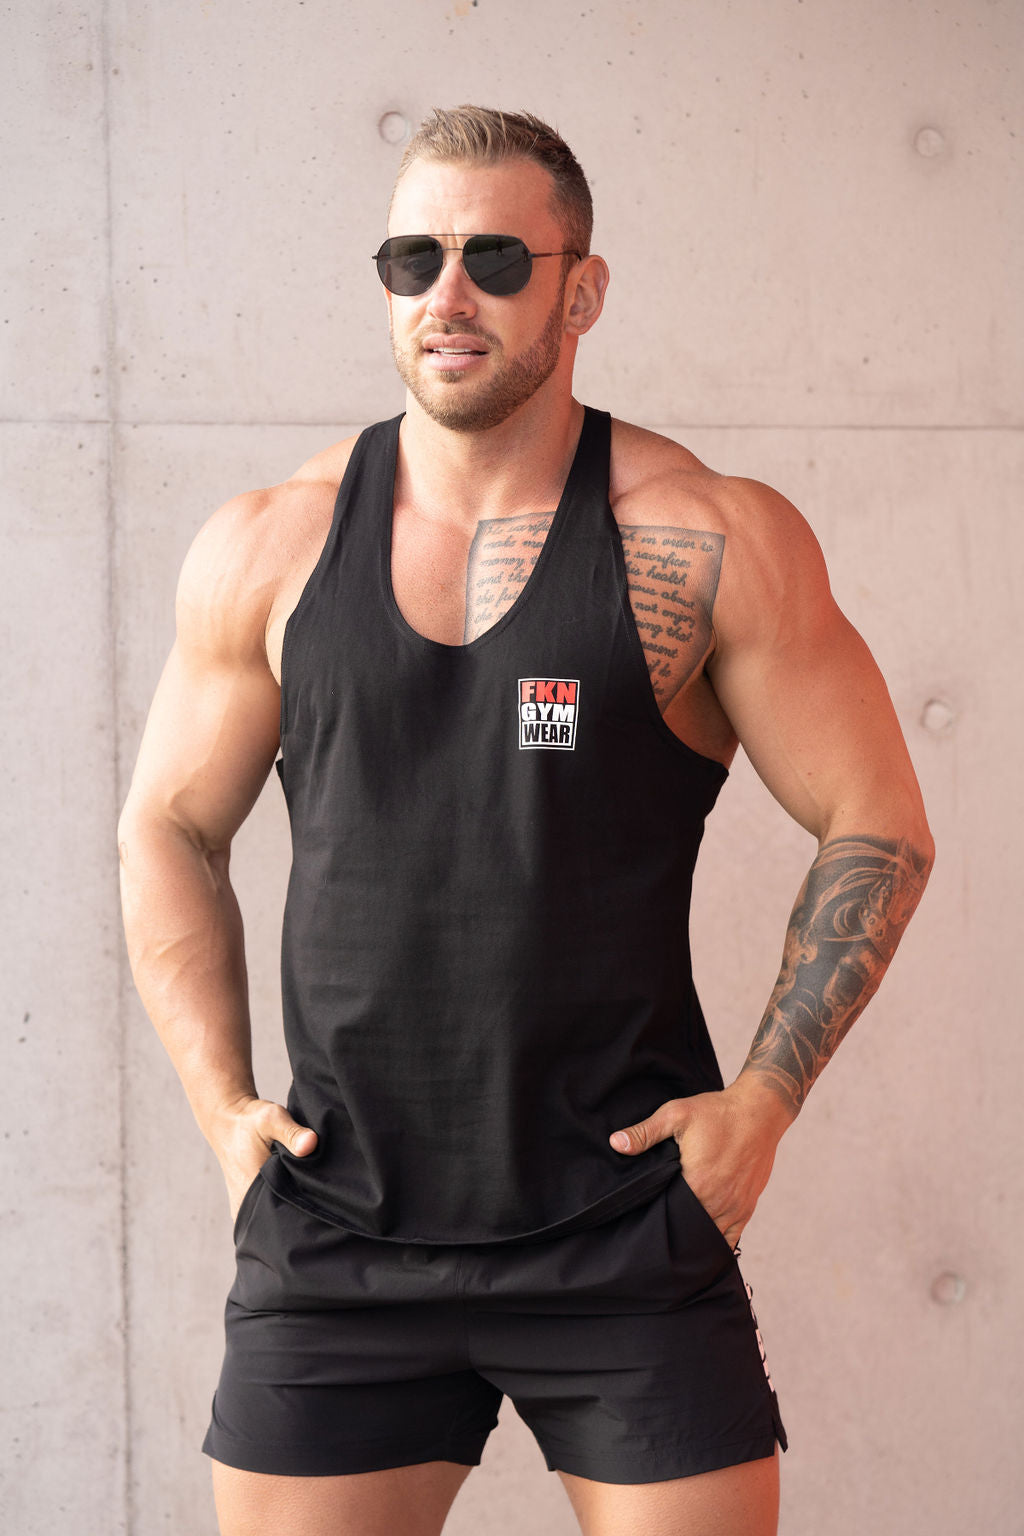 Tips to be a Tank - Benefits of Tank Tops and Gym Stringers